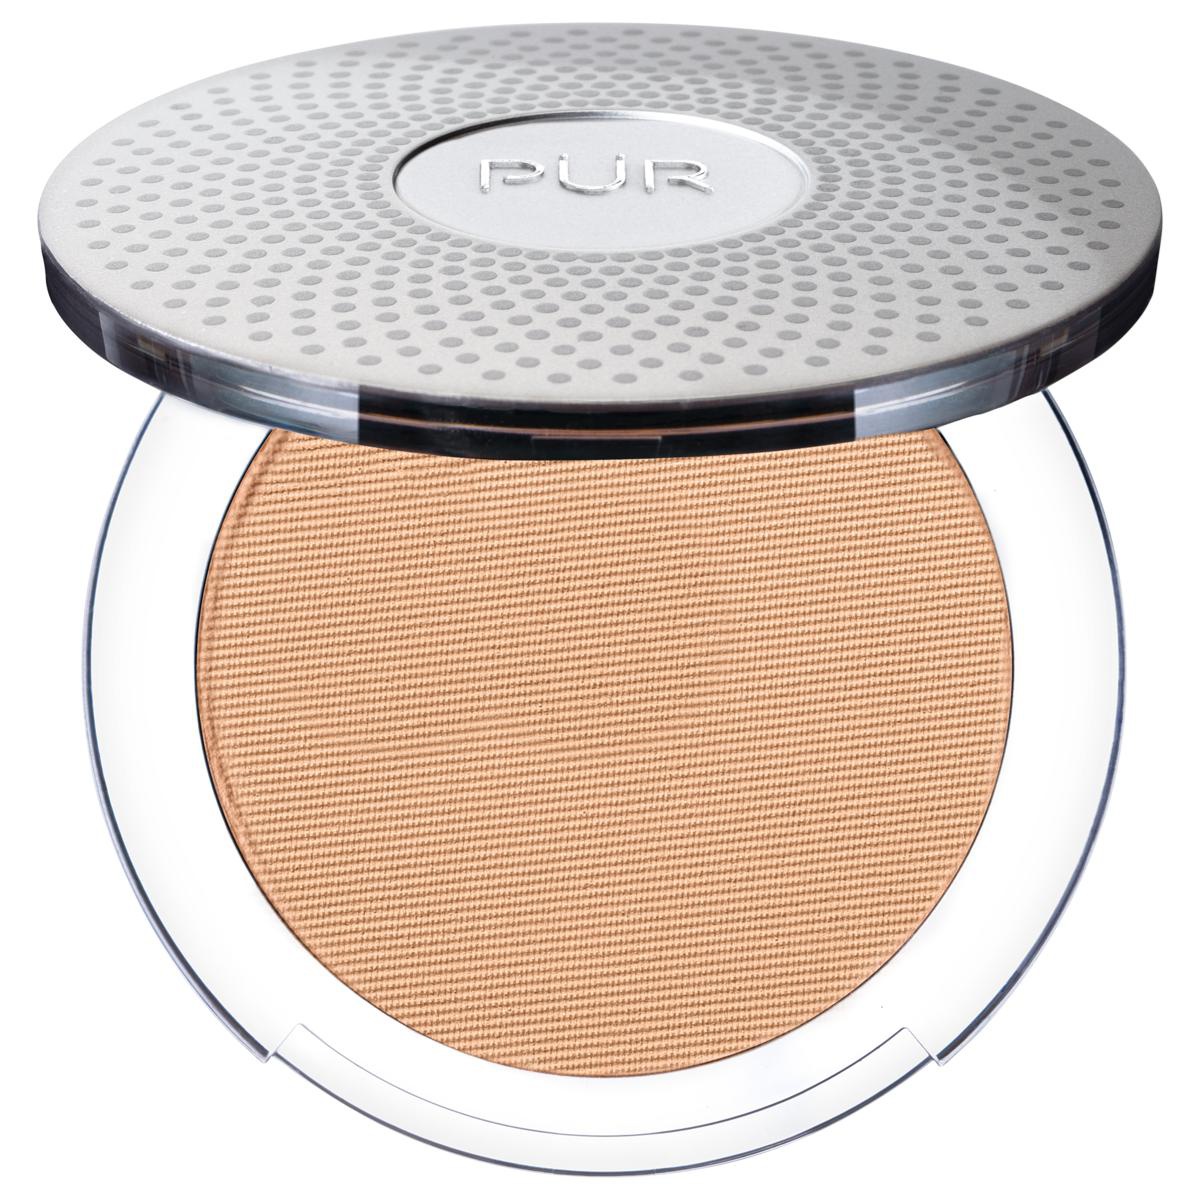 Pur 4-in-1 Pressed Mineral Makeup SPF 15